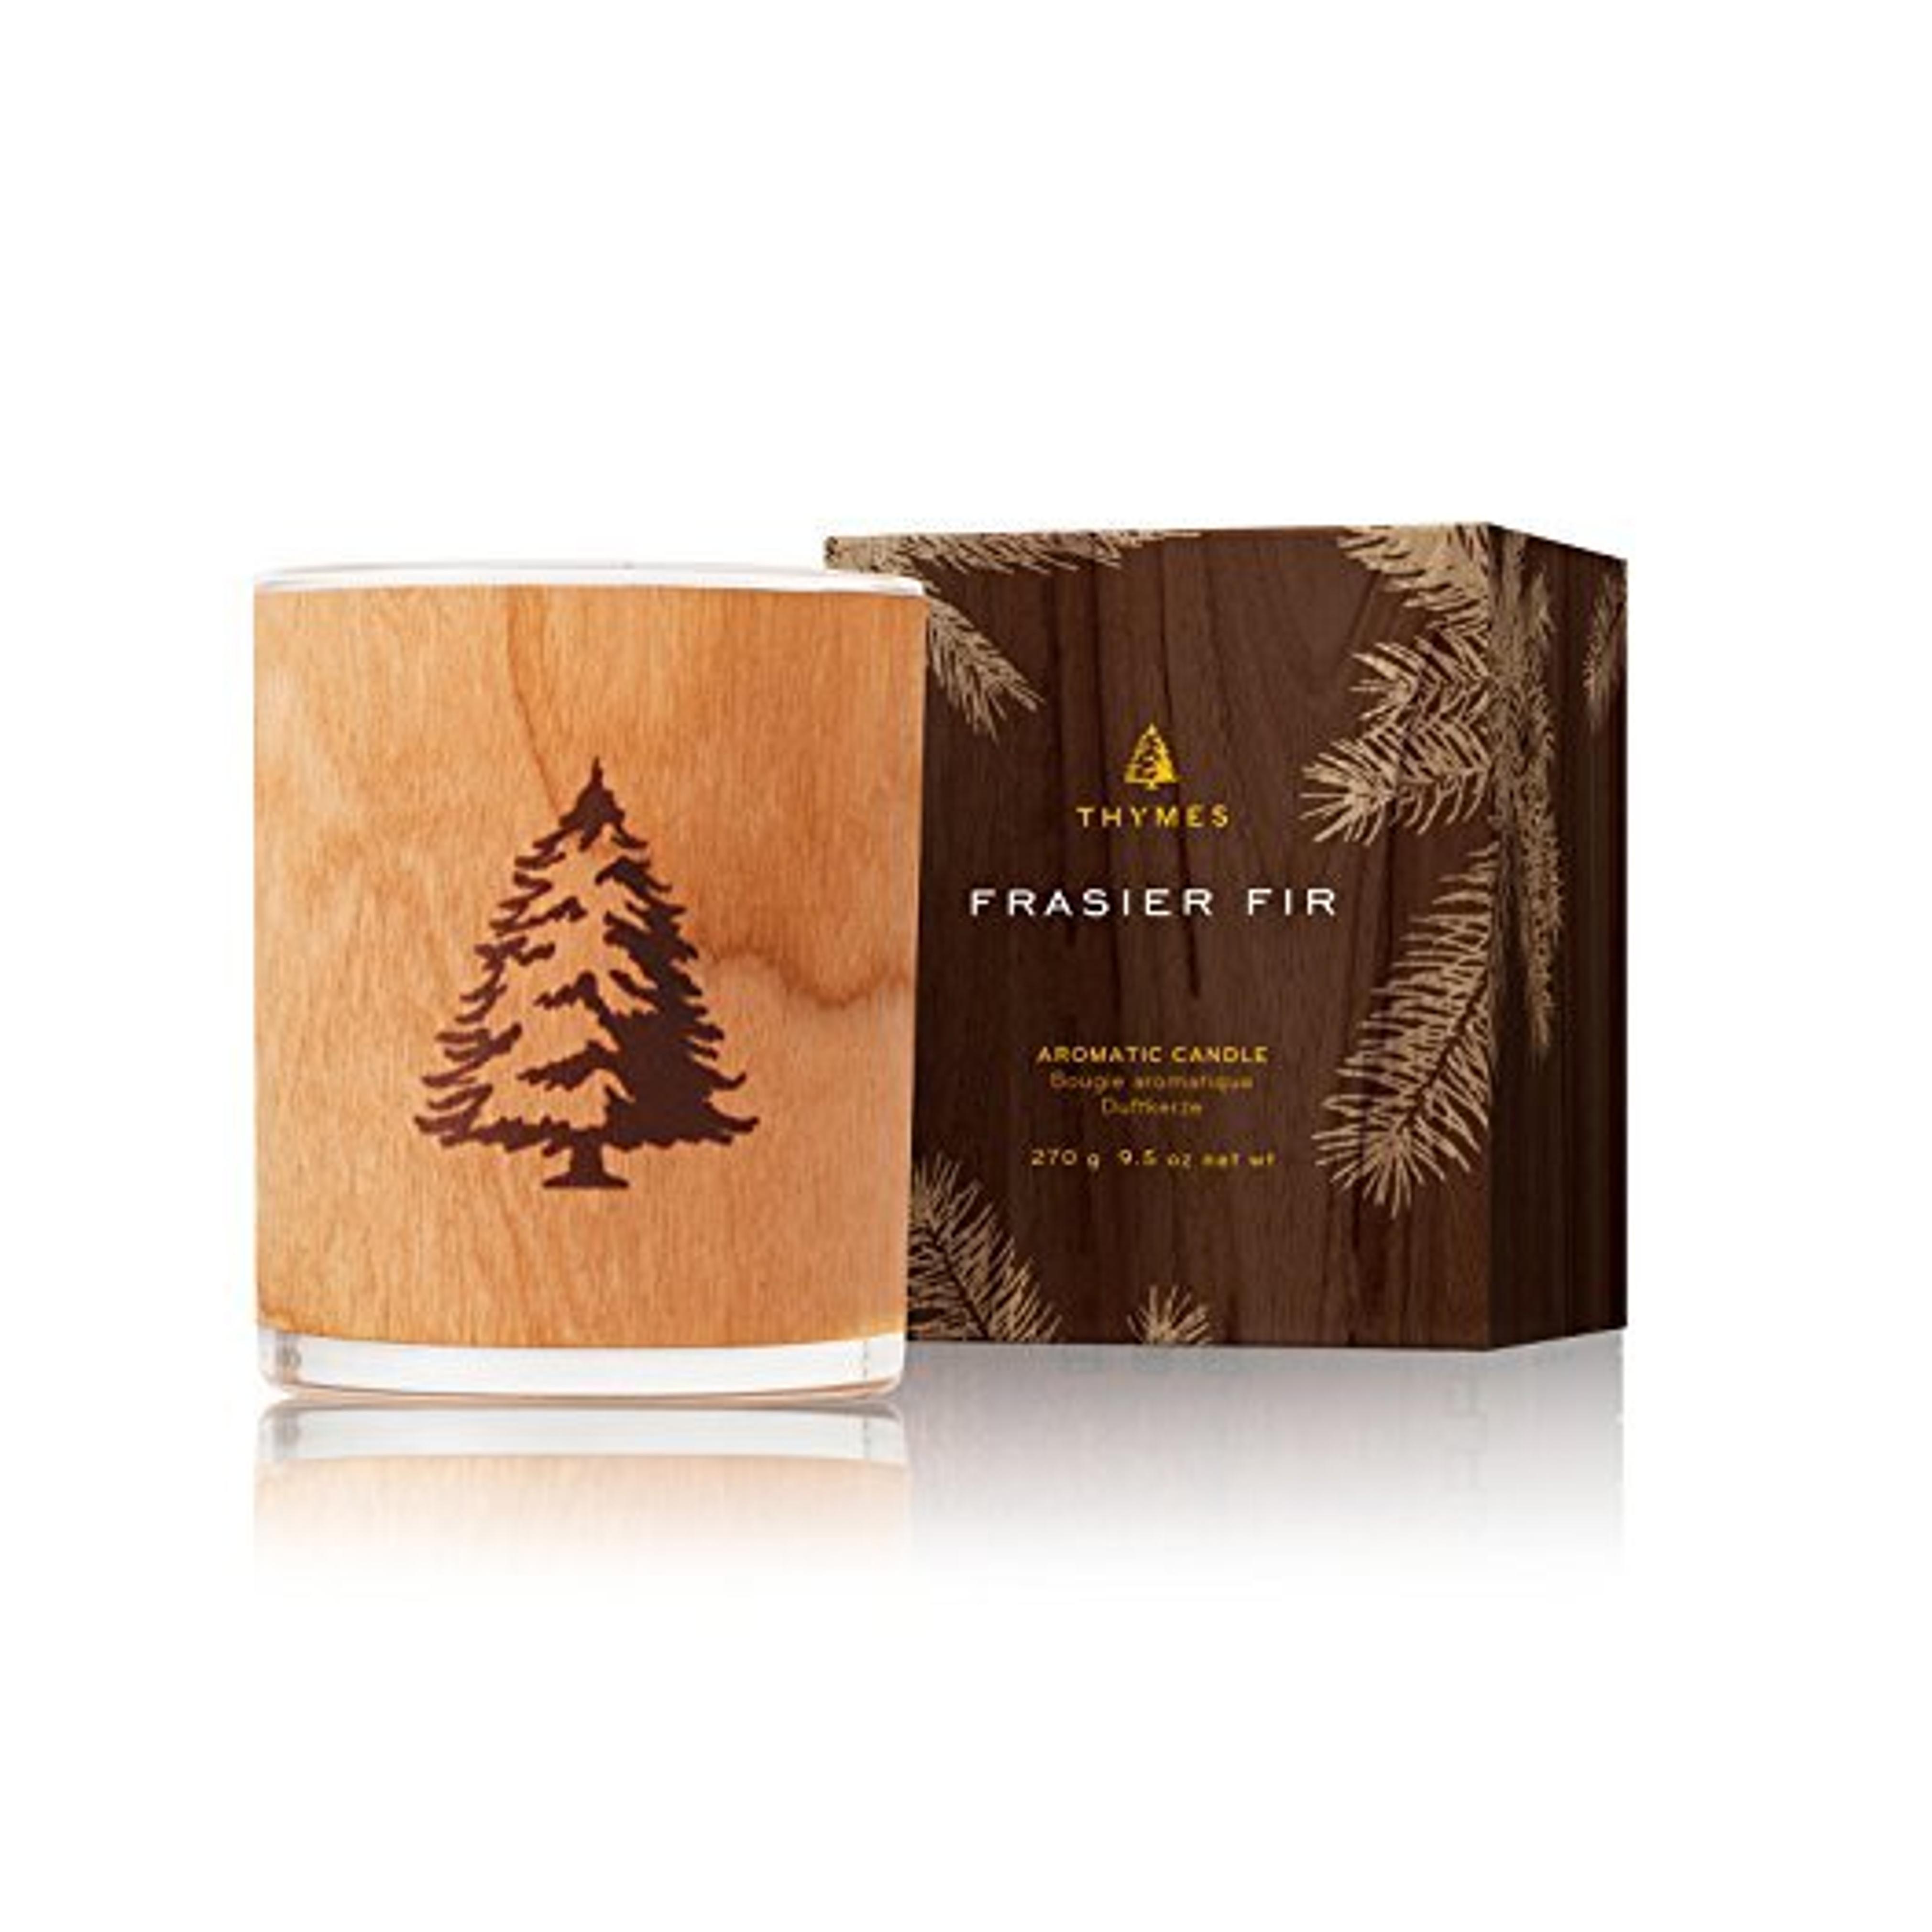 Thymes Frasier Fir Seasonal Poured Candle, Wood Wick